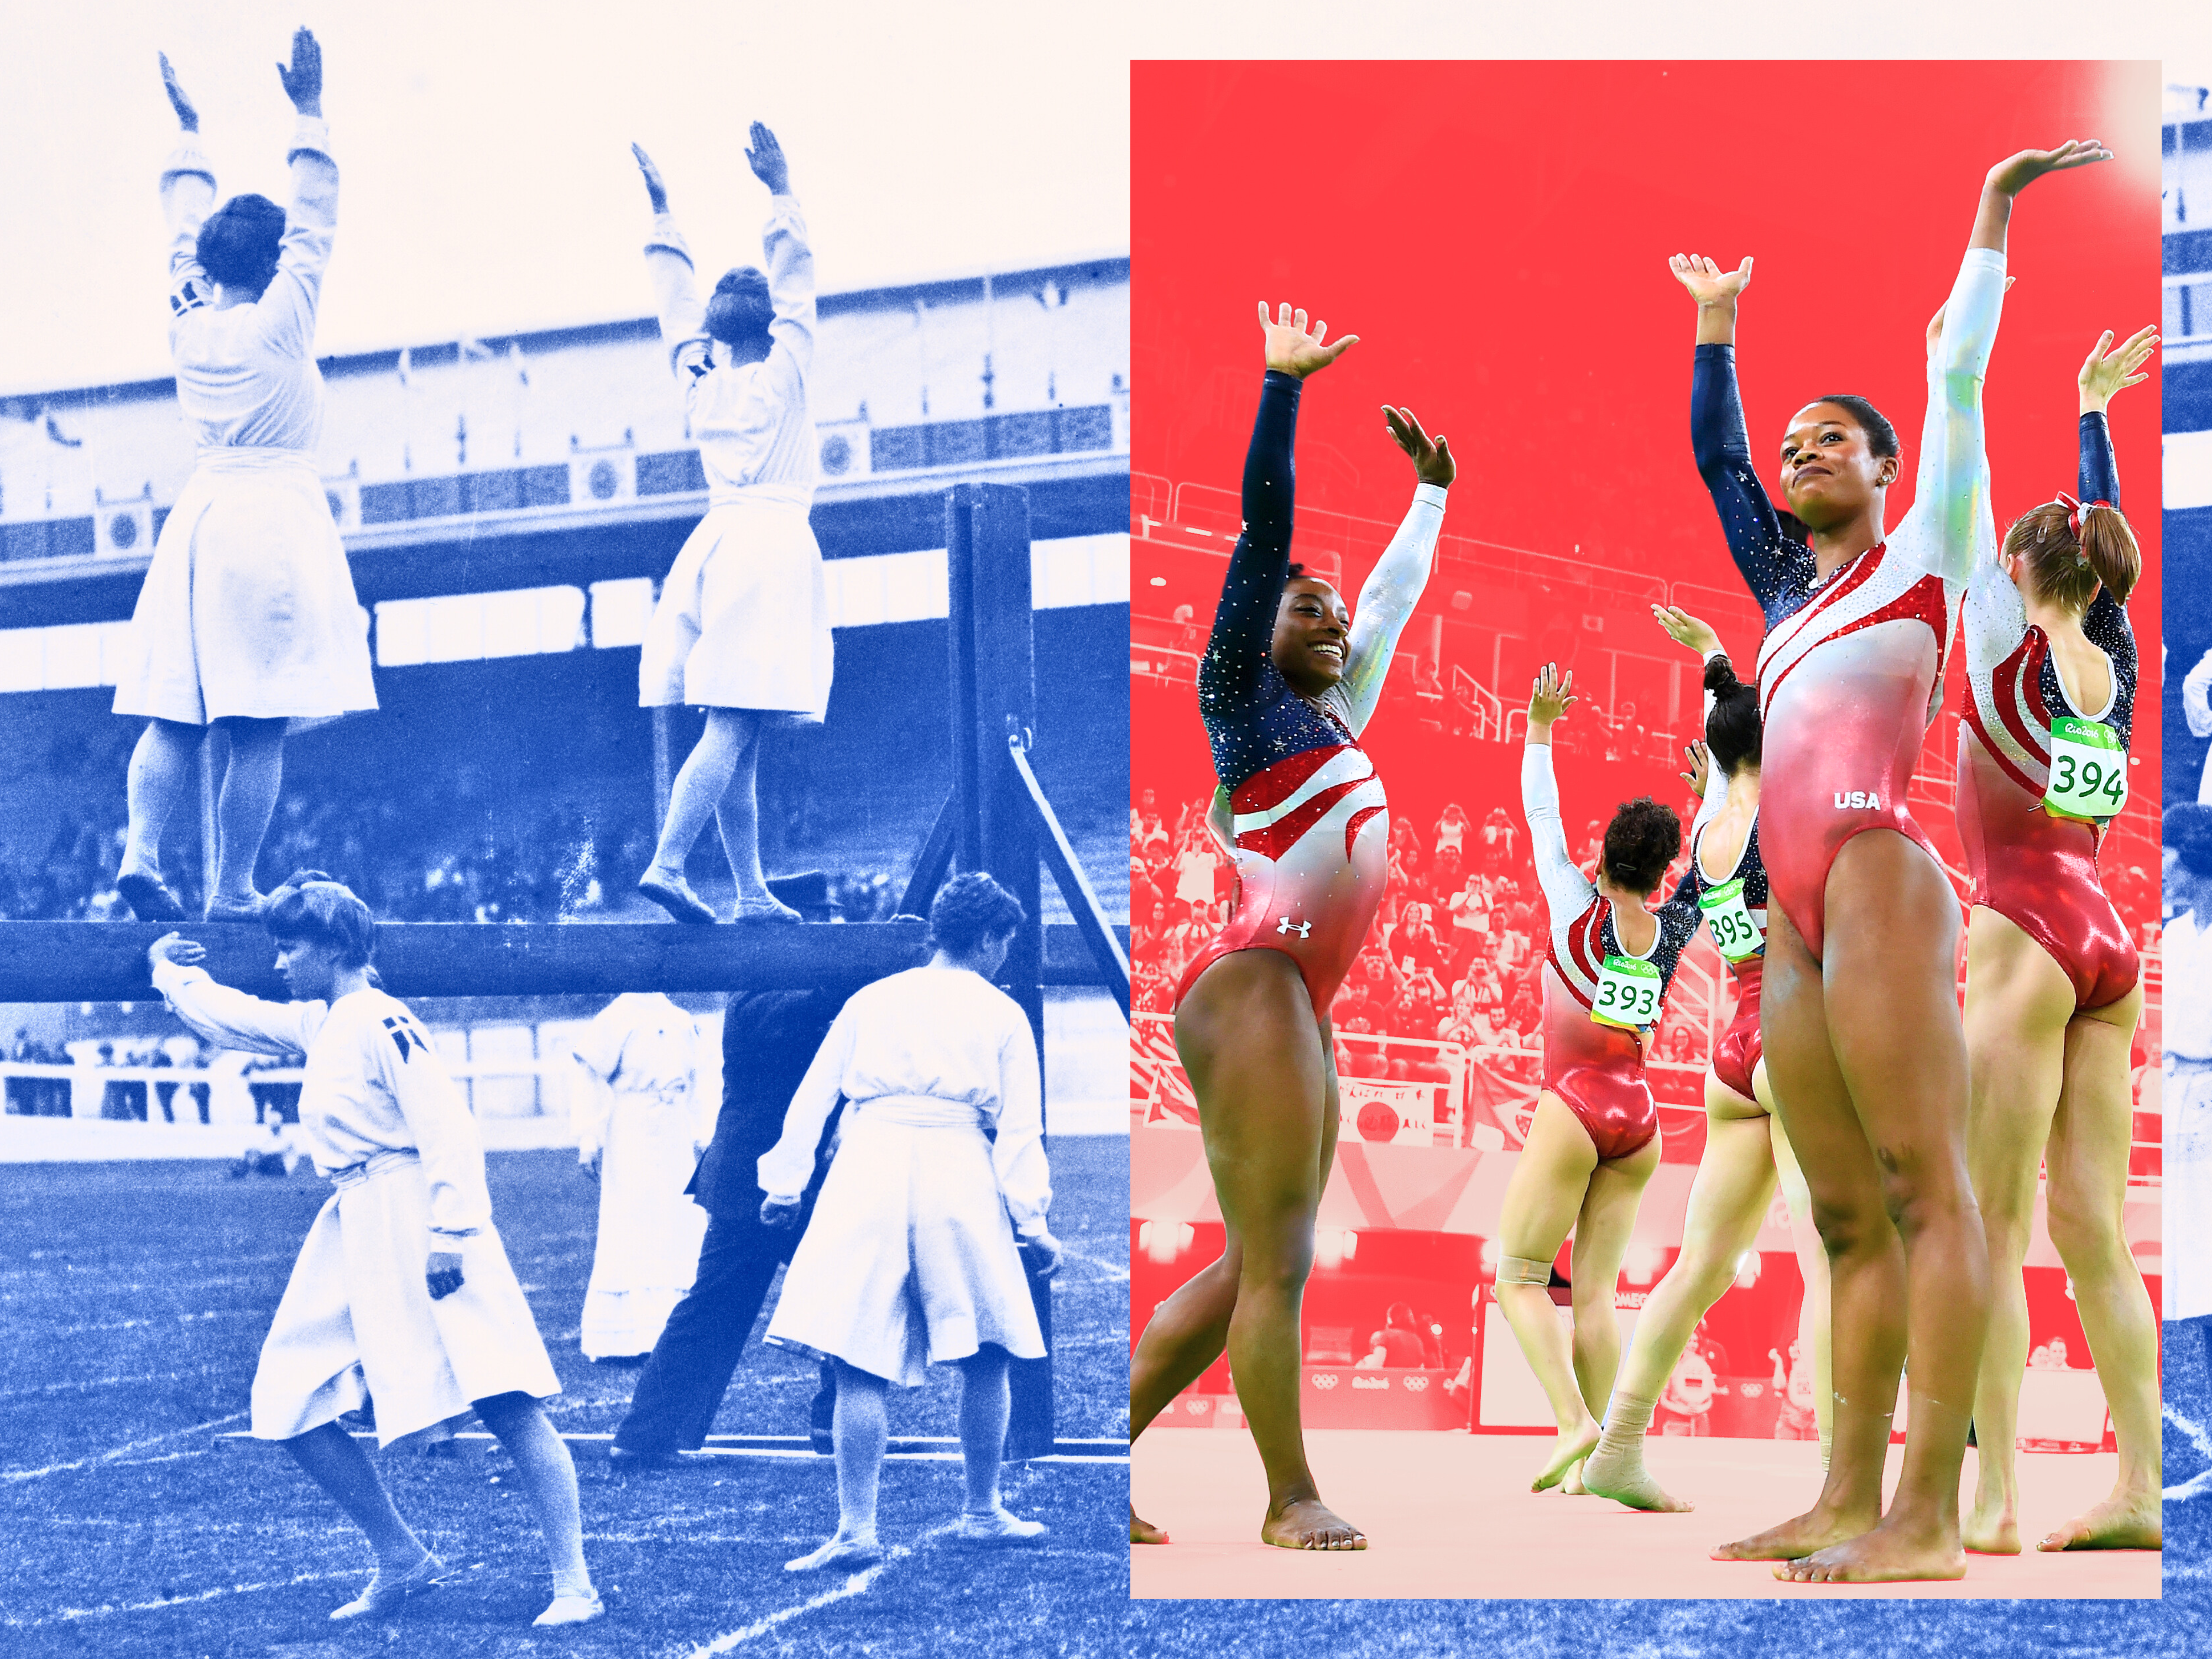 These Vintage Photos Show Just How Much Olympic Gymnastics Has Changed Over 100+ Years